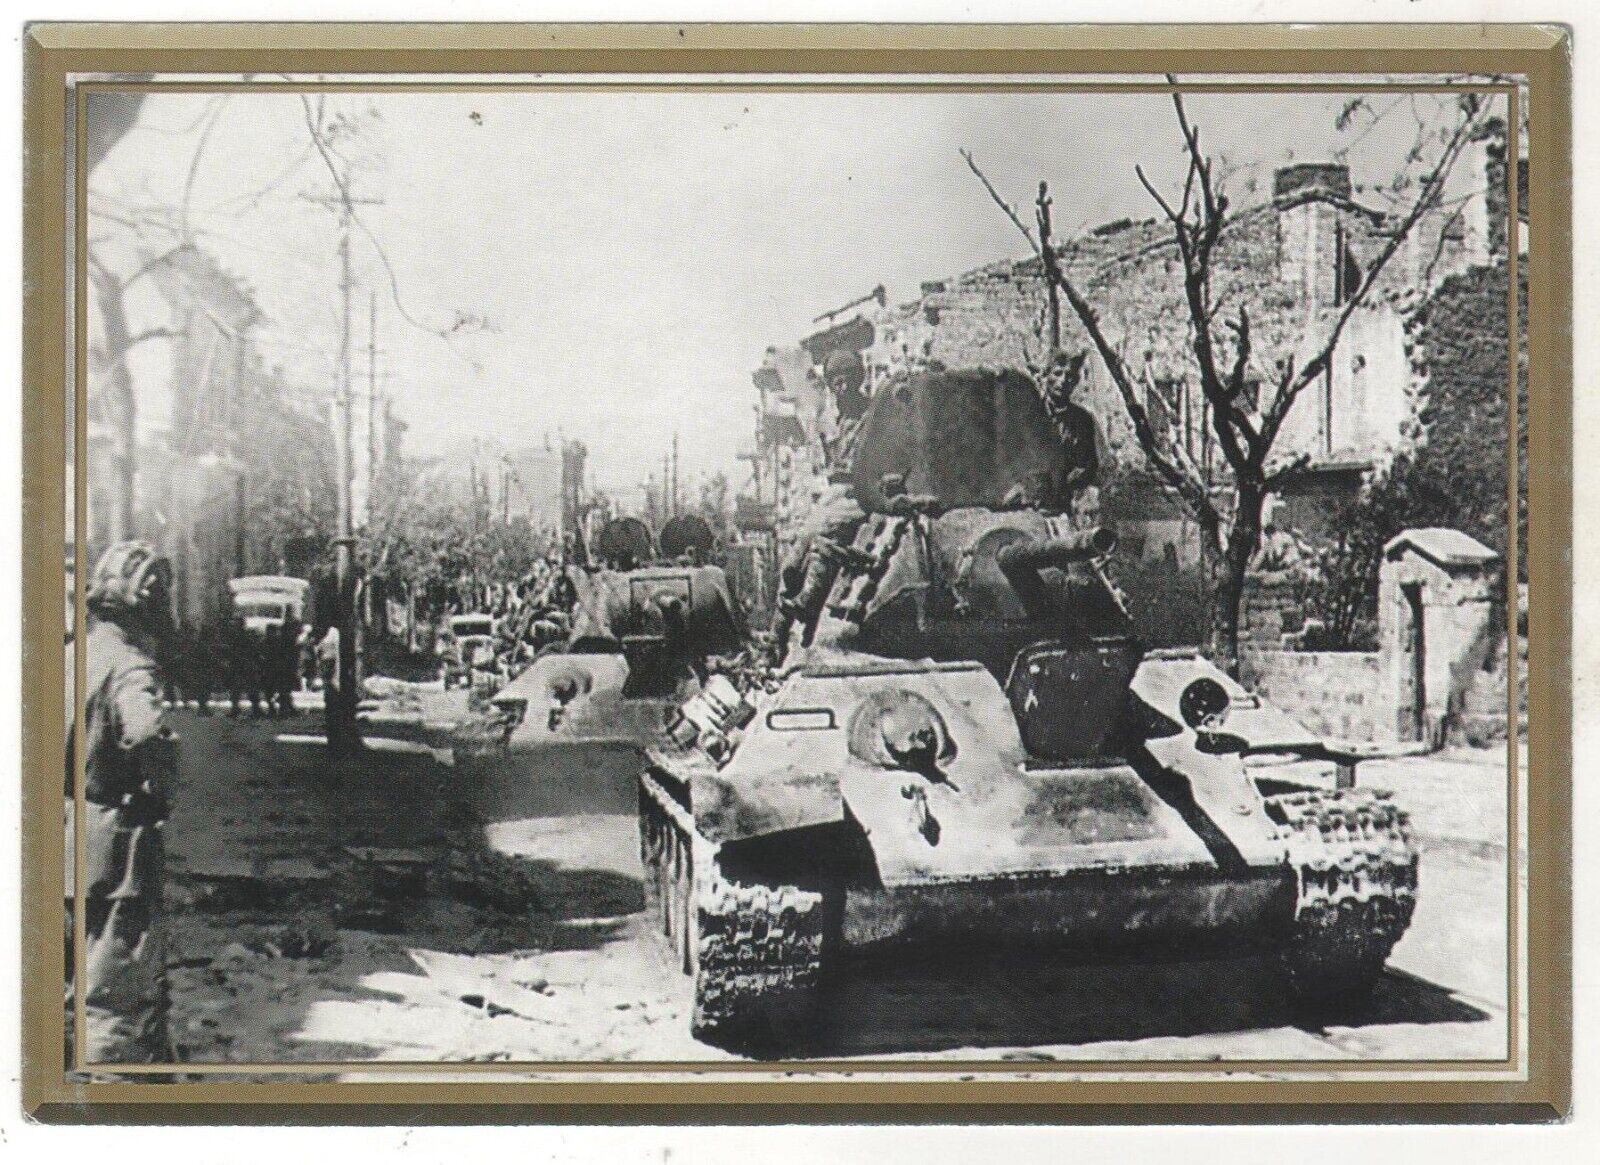 2019 SOVIET TANK T-34 military liberated from occupiers WW2 Russia Old Postcard